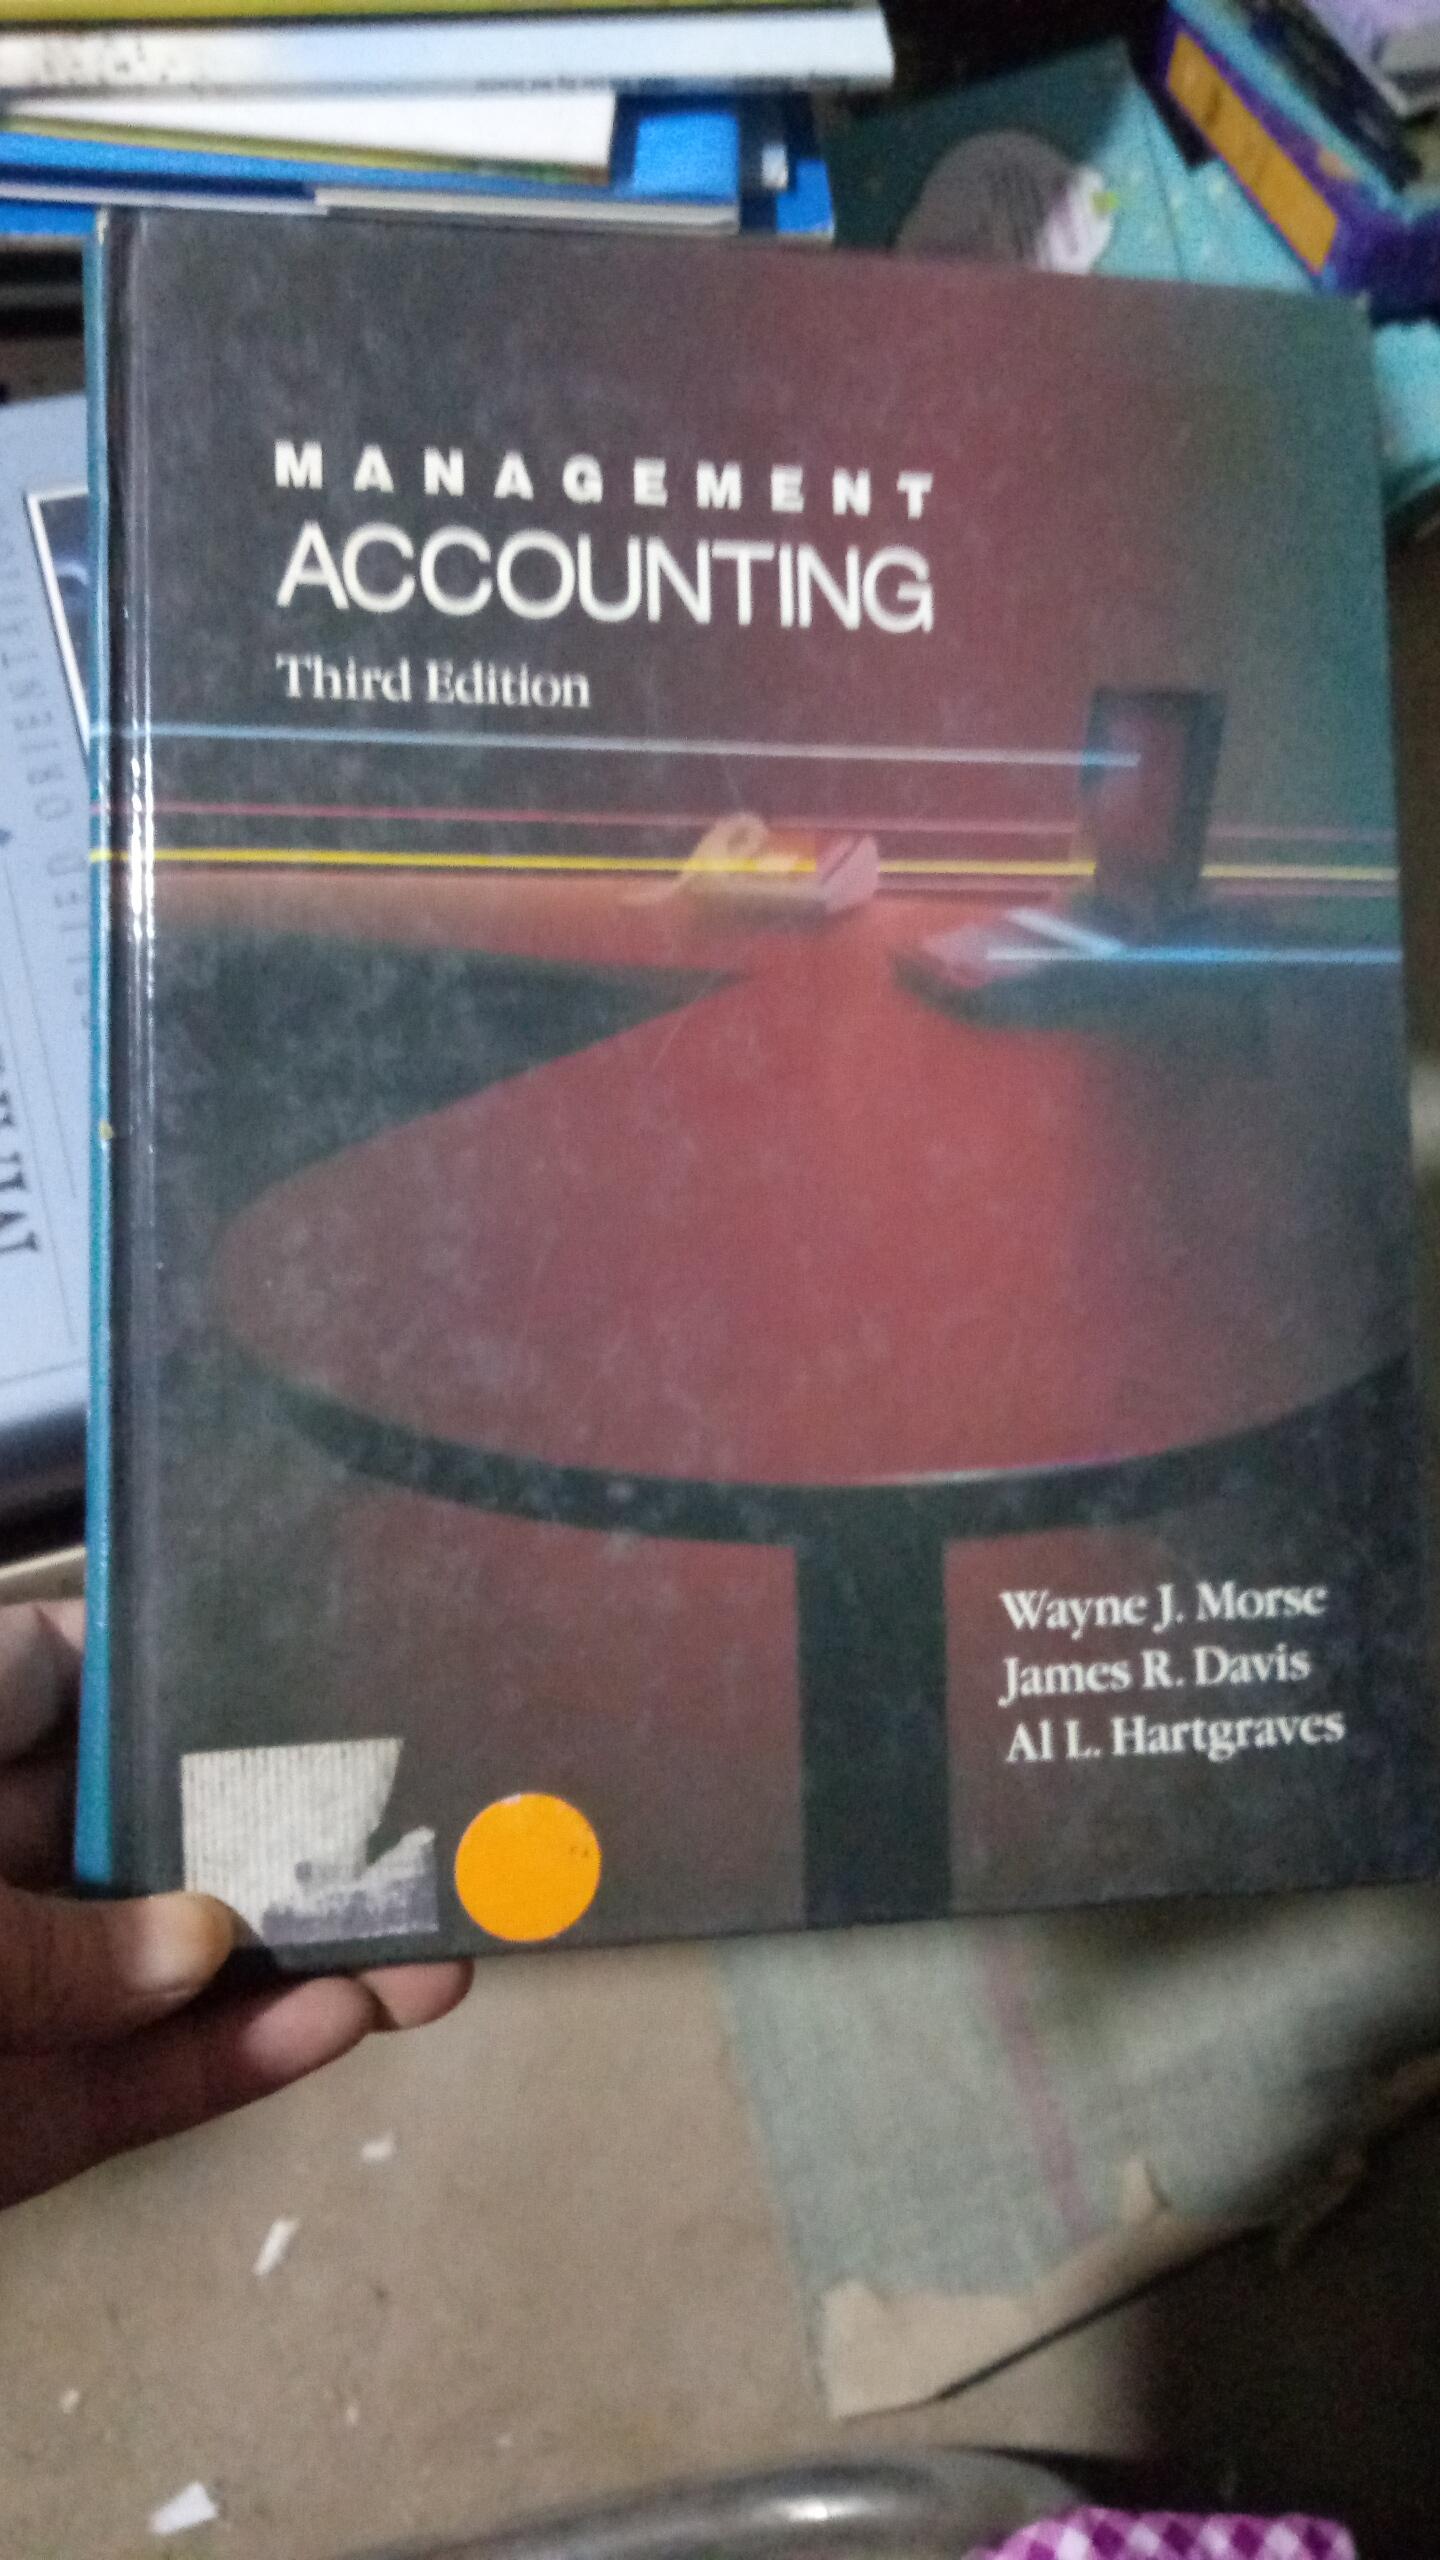 MANAGEMENT ACCOUNTING Third Edition